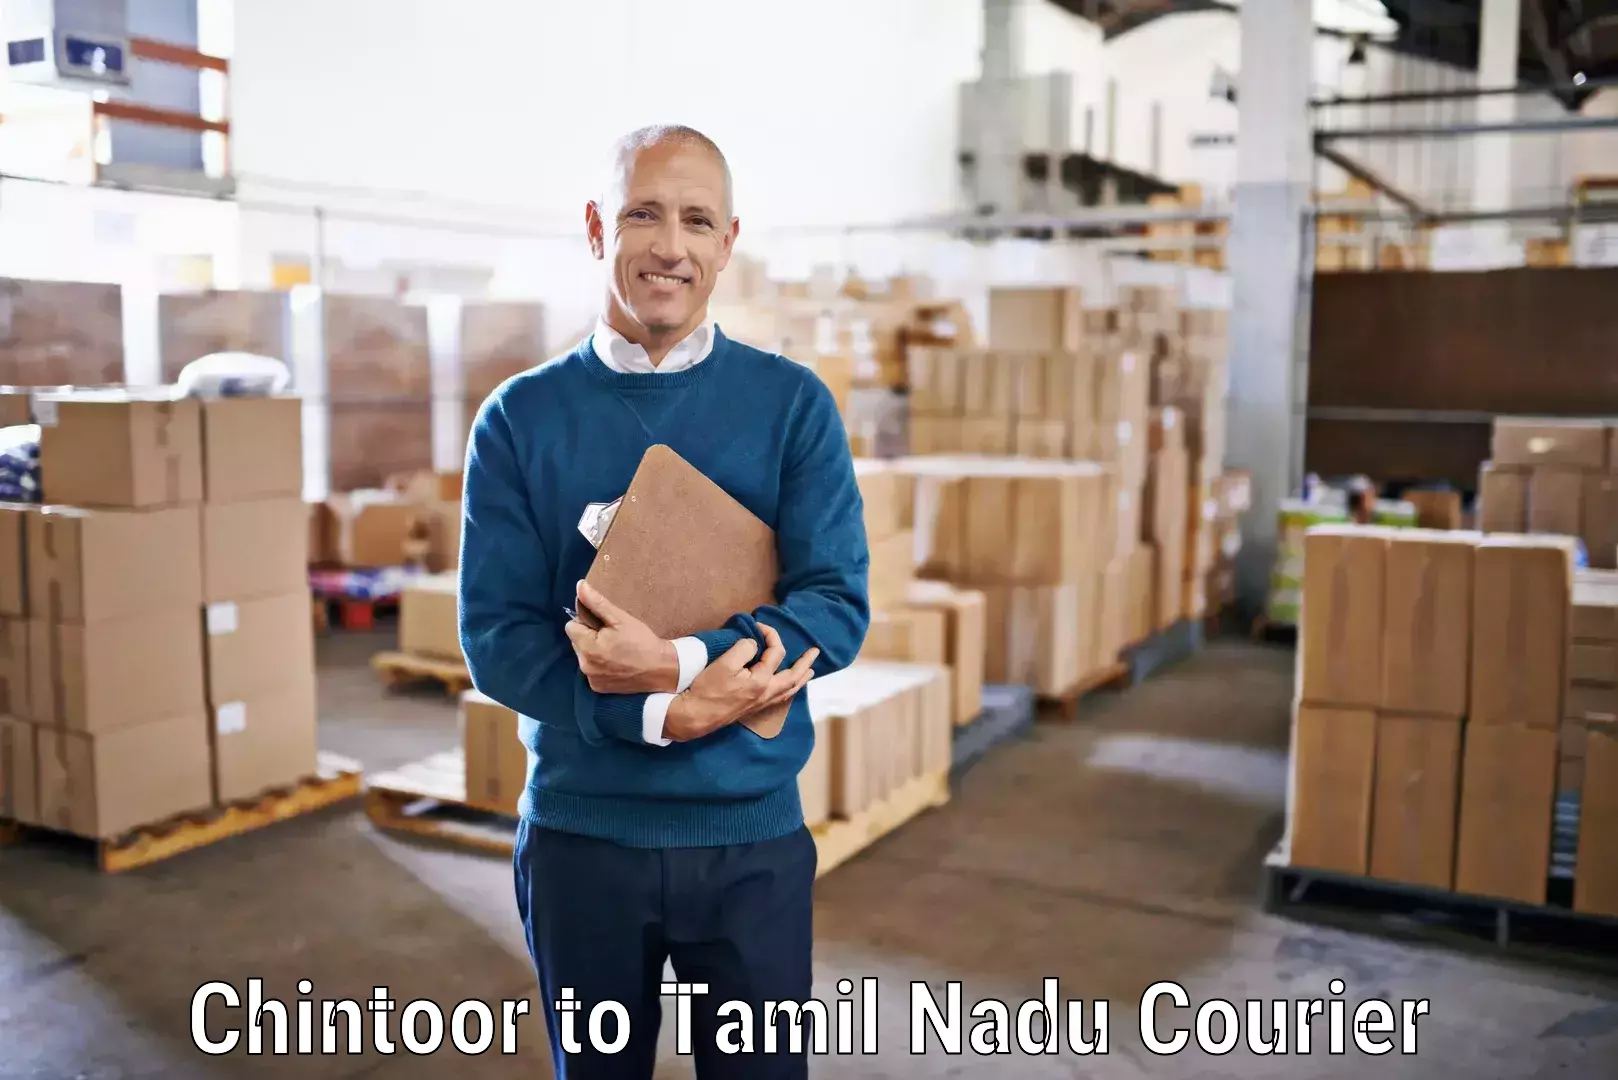 Multi-national courier services Chintoor to Perundurai